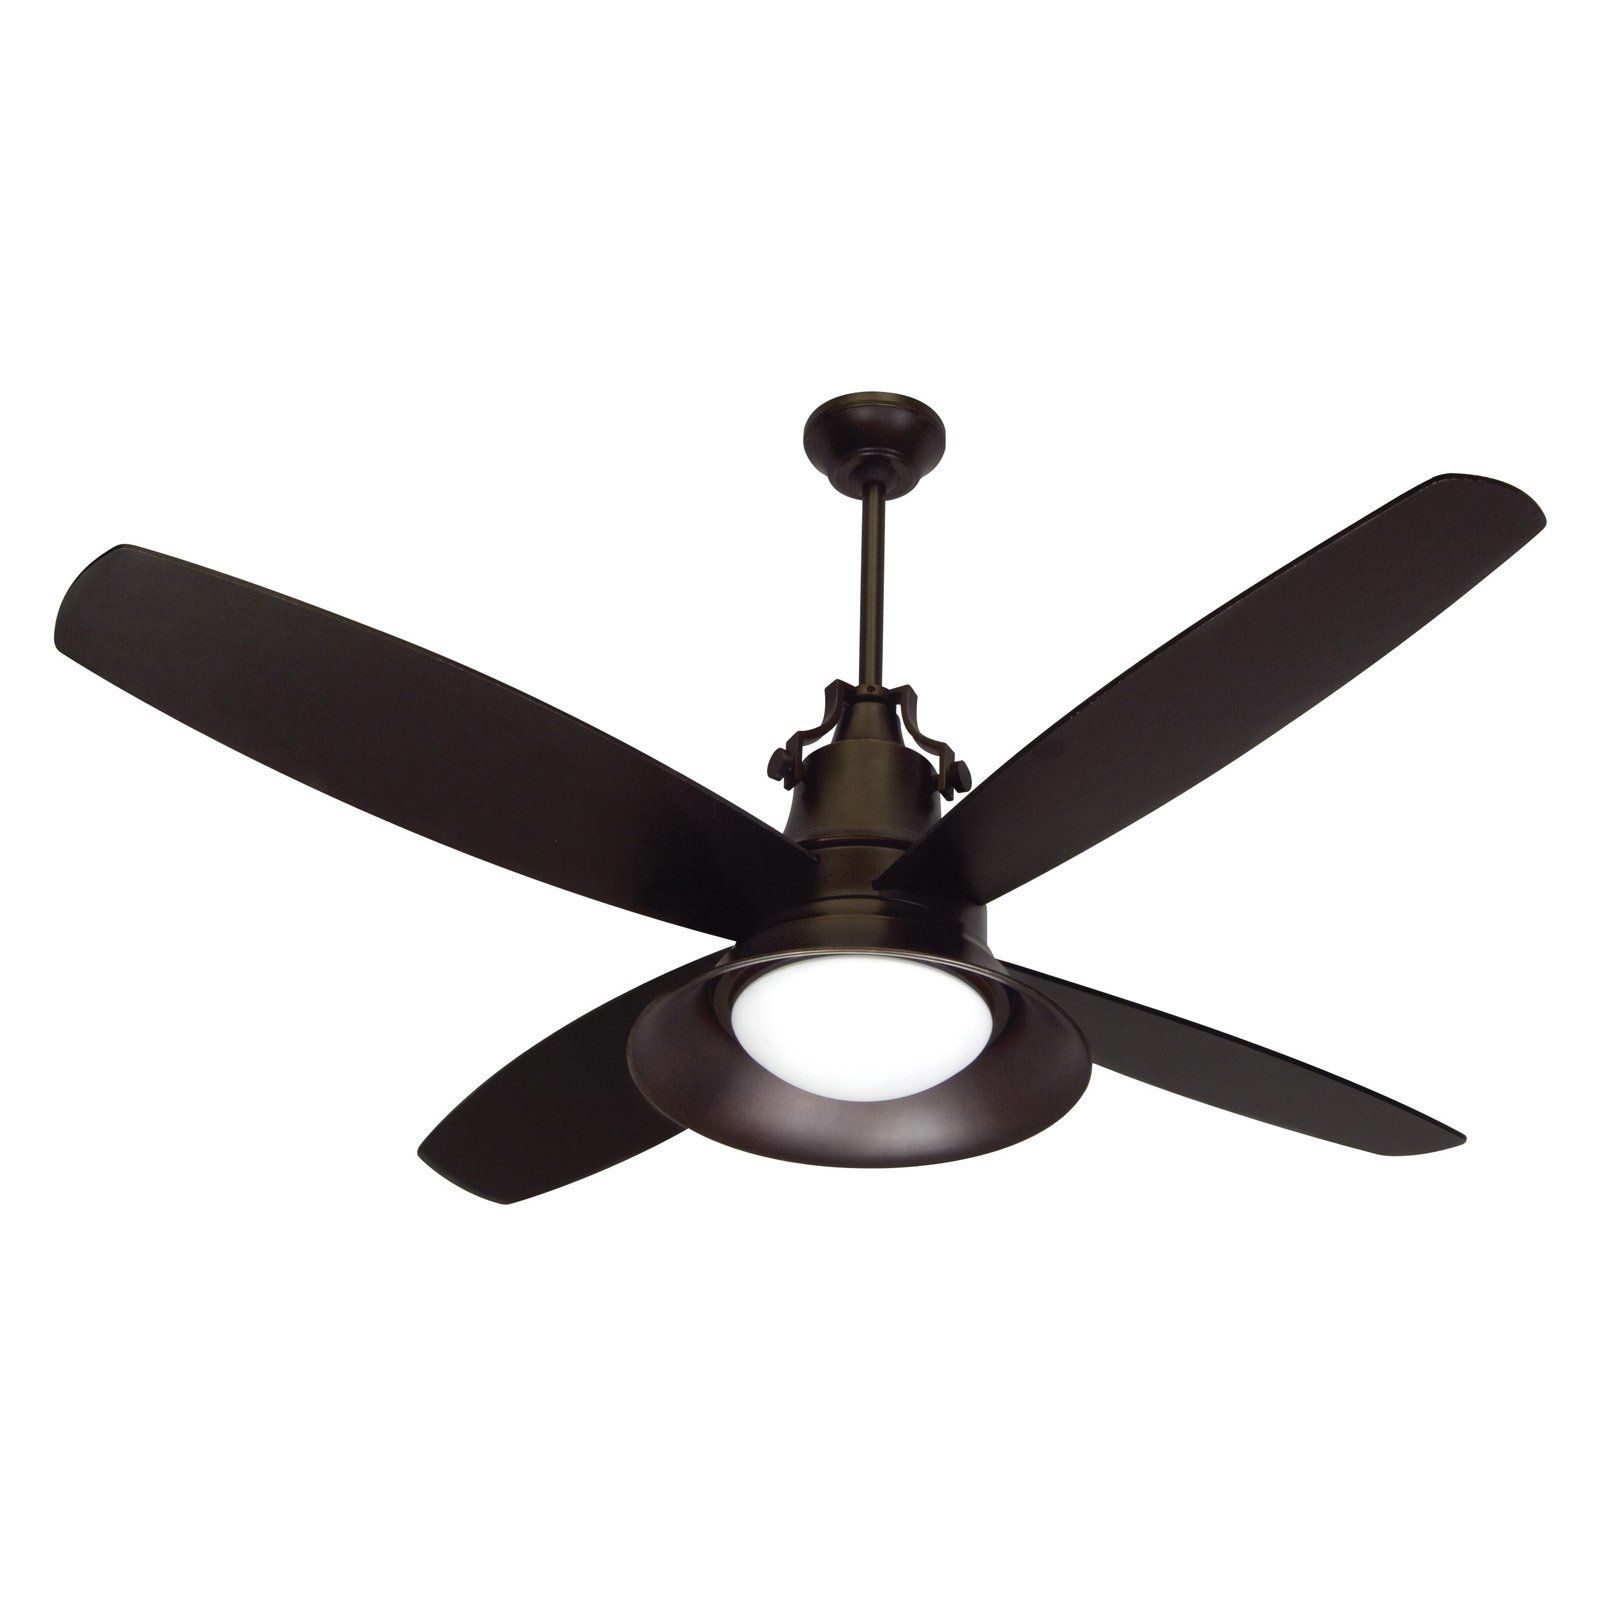 Brown Outdoor Ceiling Fan With Light Within Most Current Craftmade Un52obg Union 52 In (View 11 of 20)